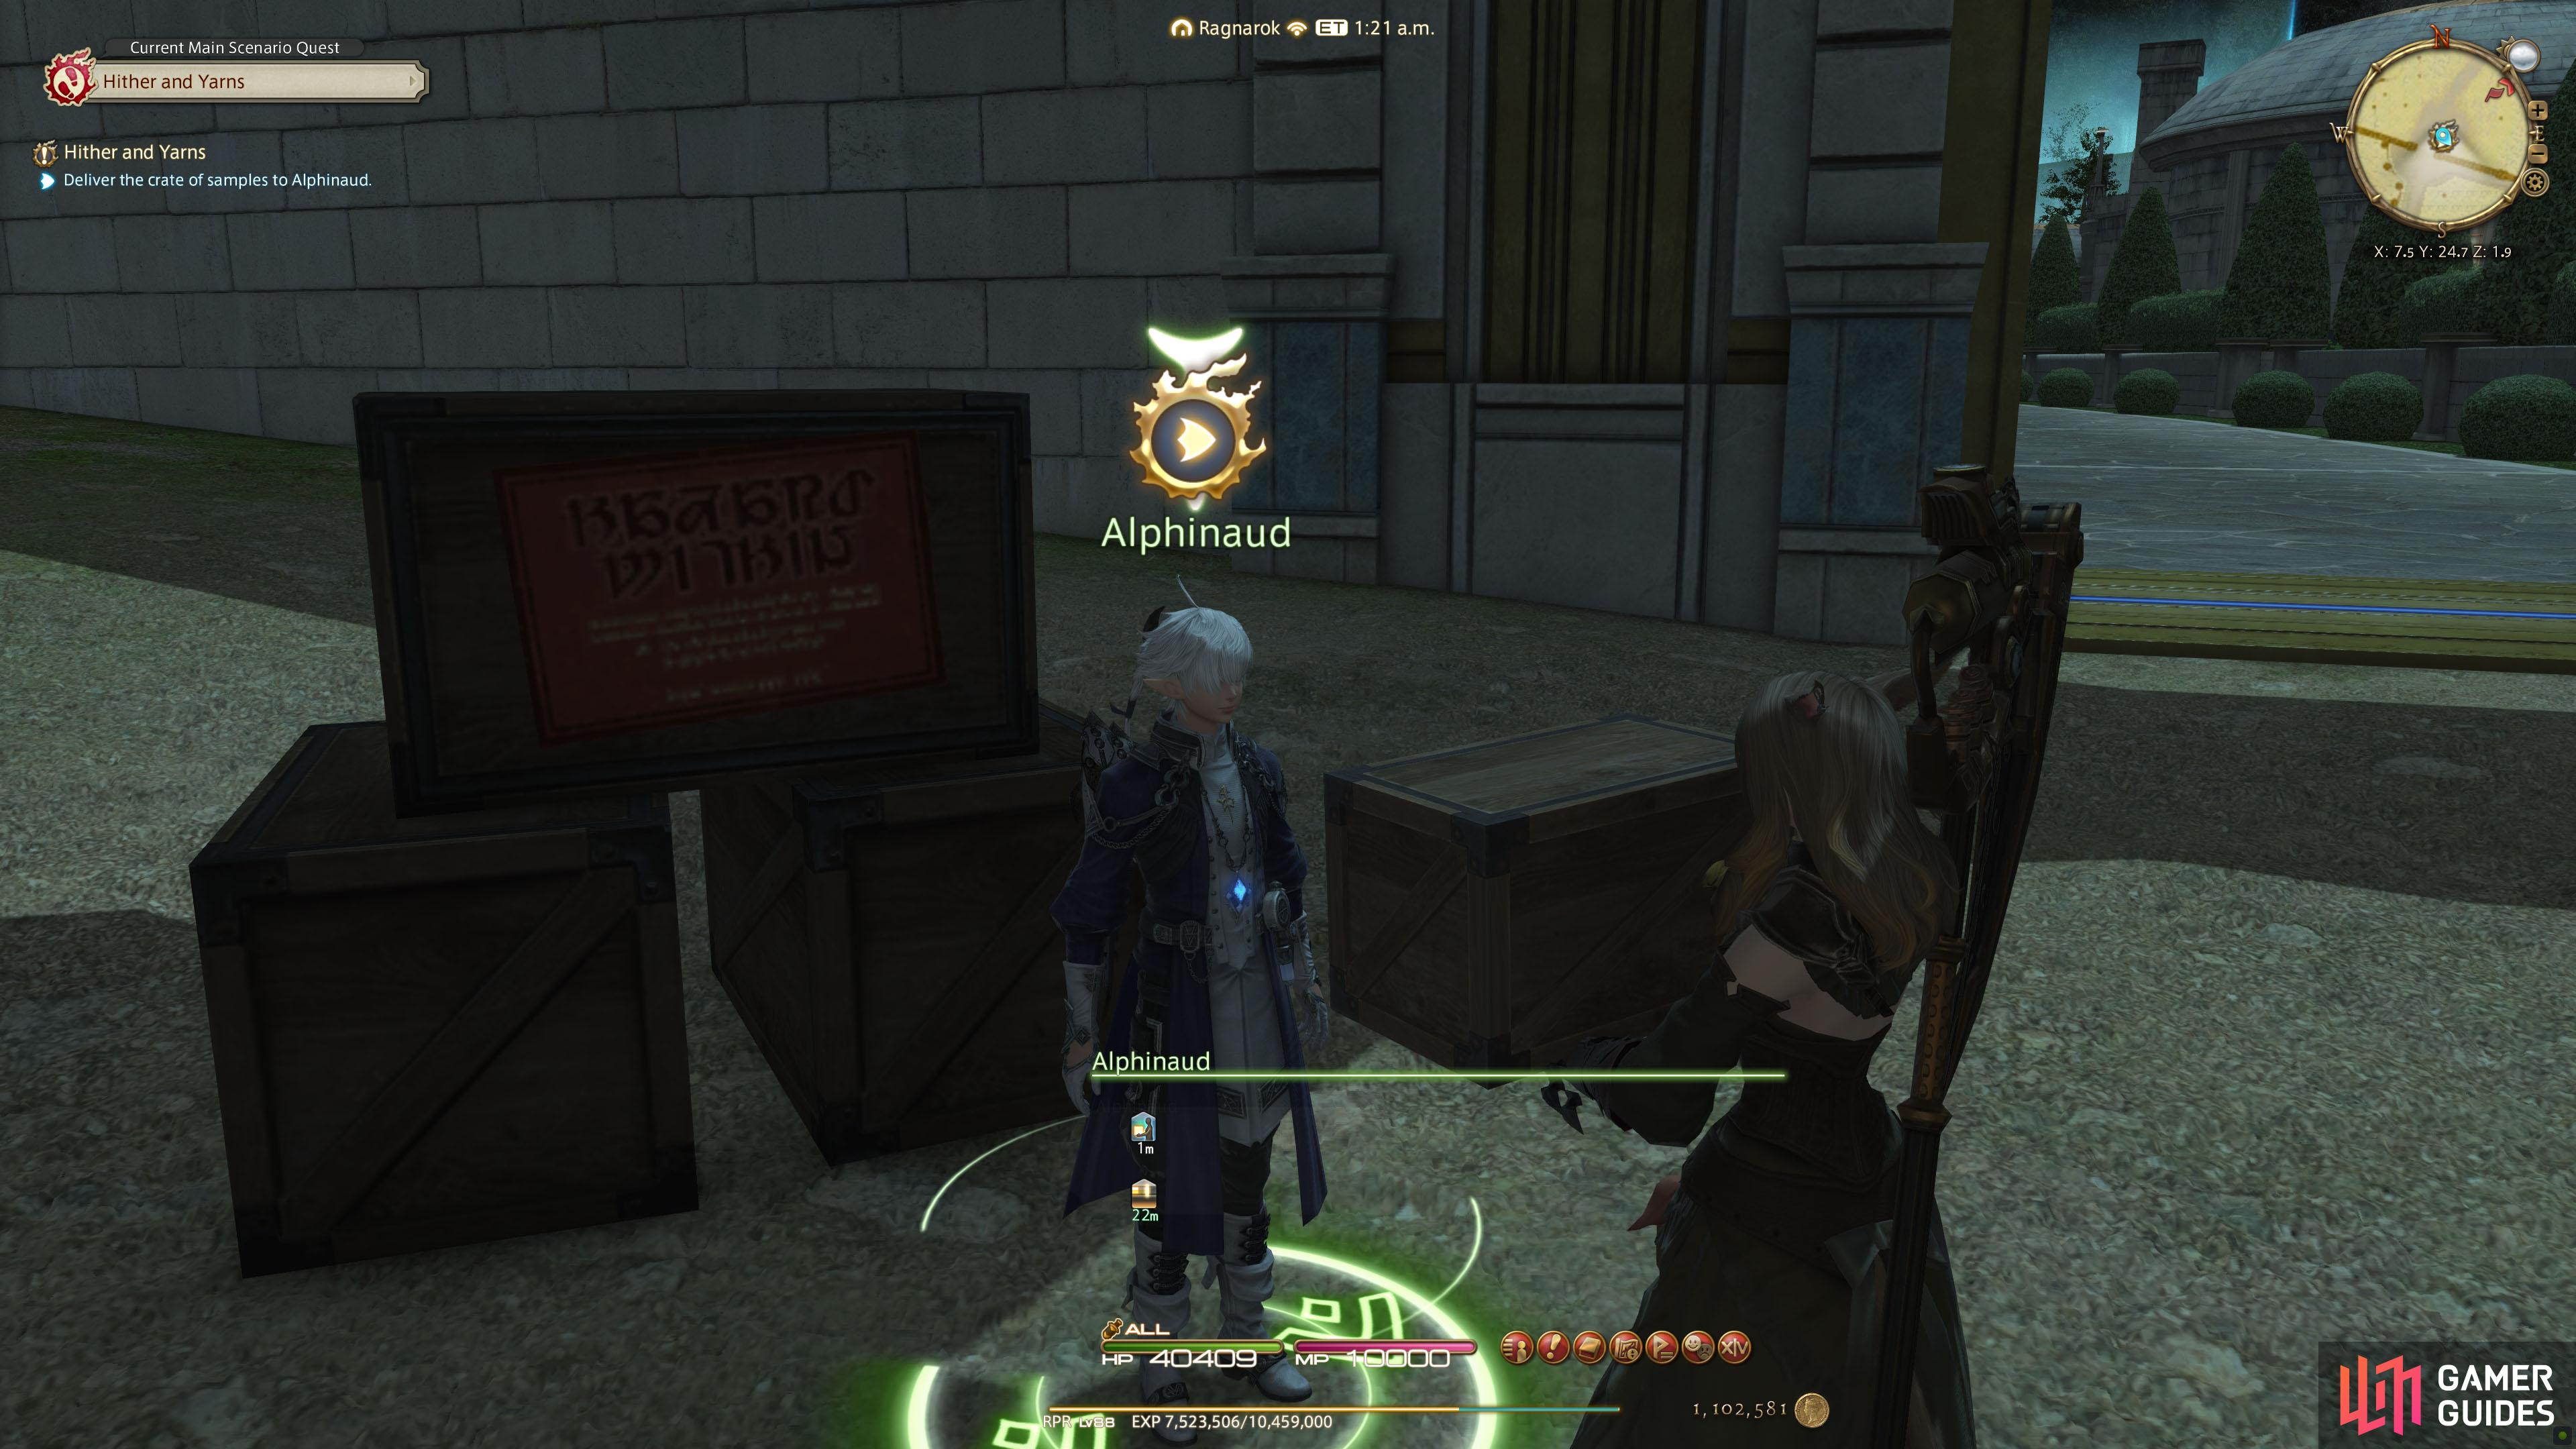 Deliver it to Alphinaud